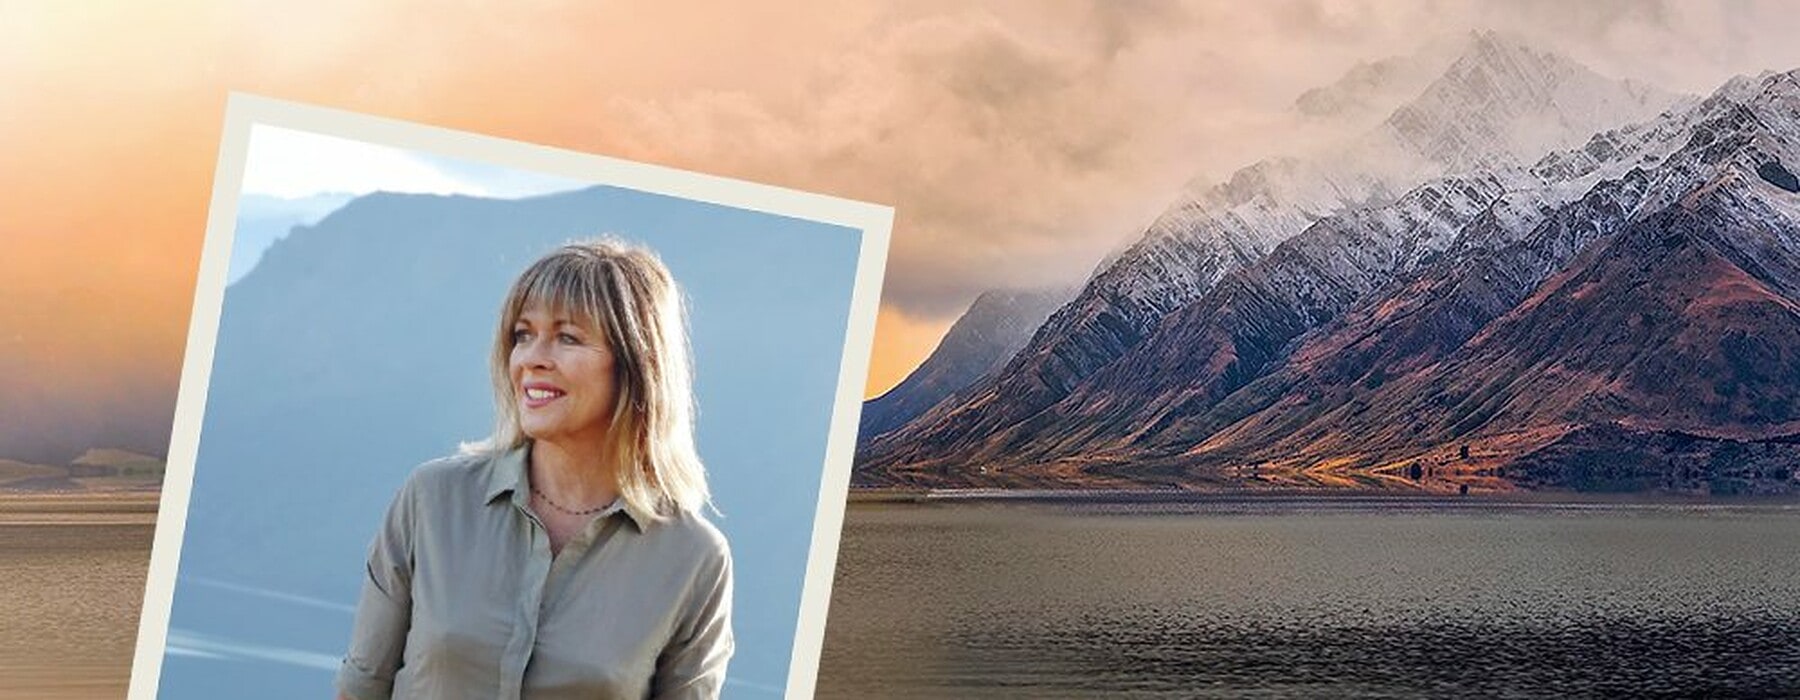 Lake Wanaka with orange skies and a picture of Annabel Langbein overlaid